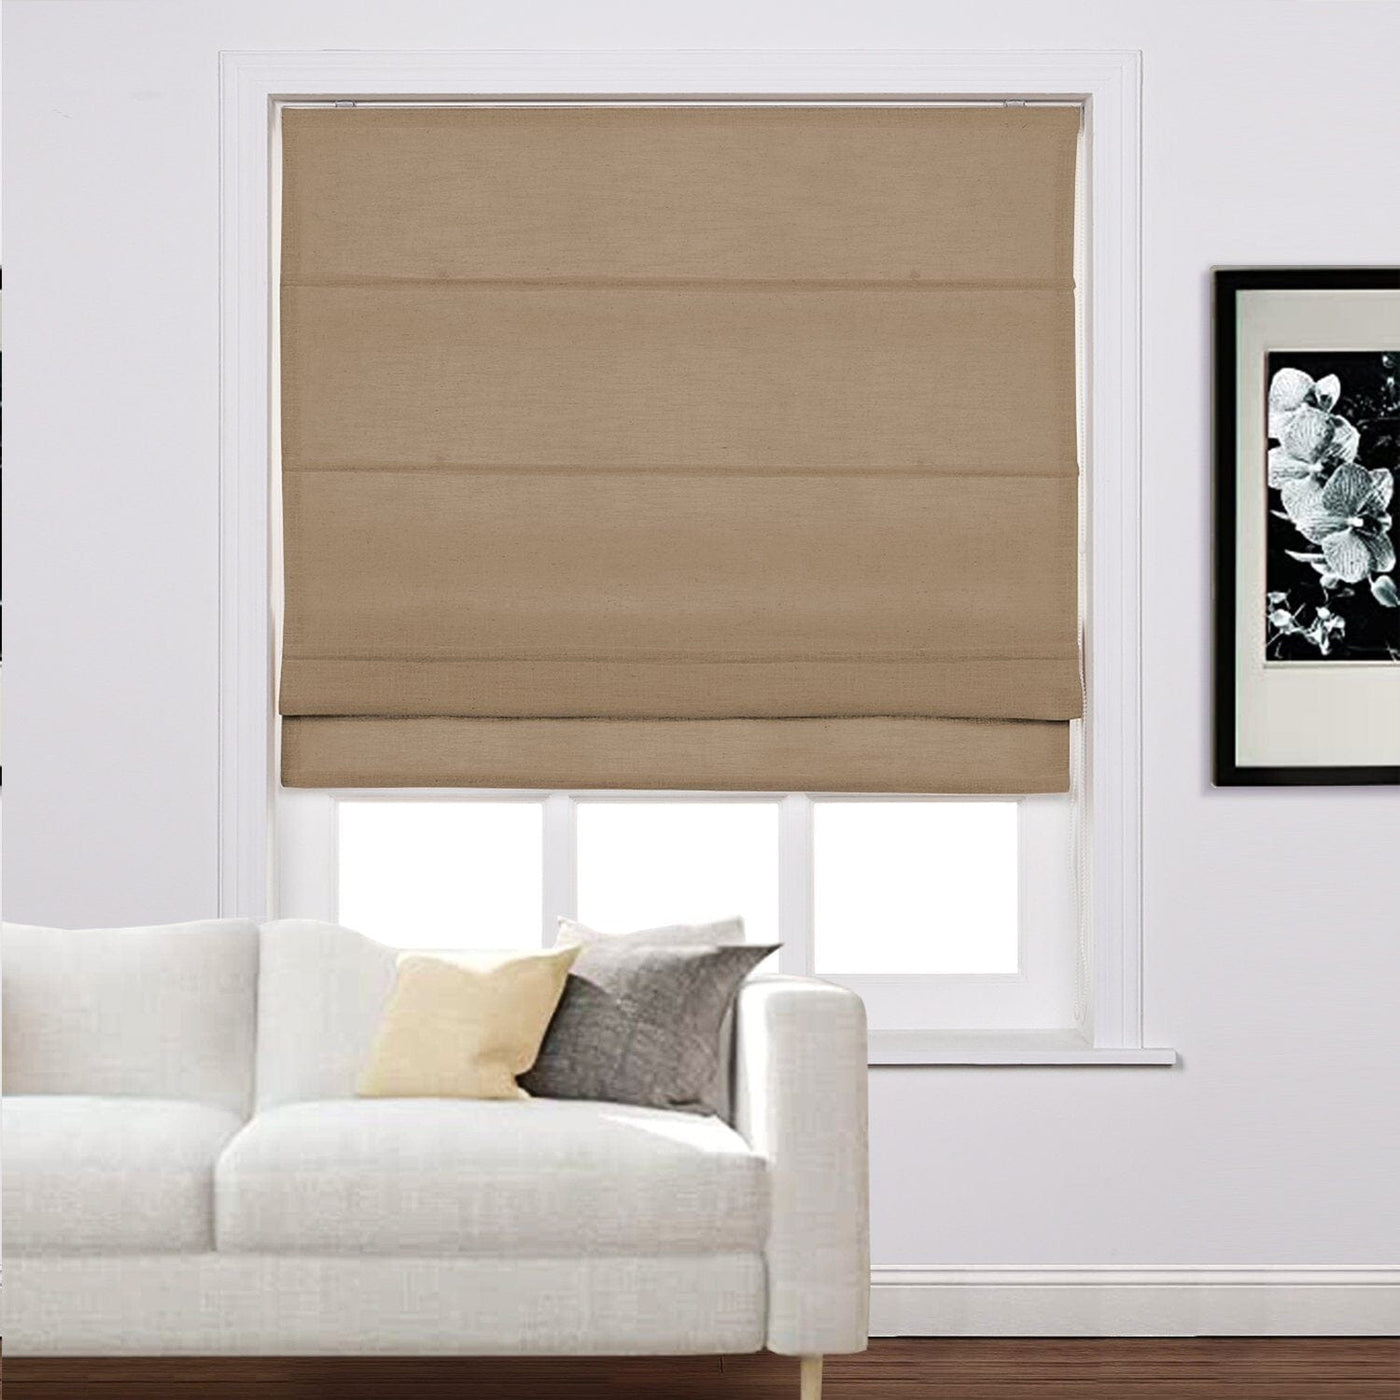 LIZ Linen Customized Roman Shade, Canvas Roman Shade with Loop Control, Kitchen Window Door Roman Shade, Install Hardware Included TWOPAGES CURTAINS Rust Brown 1908-9 